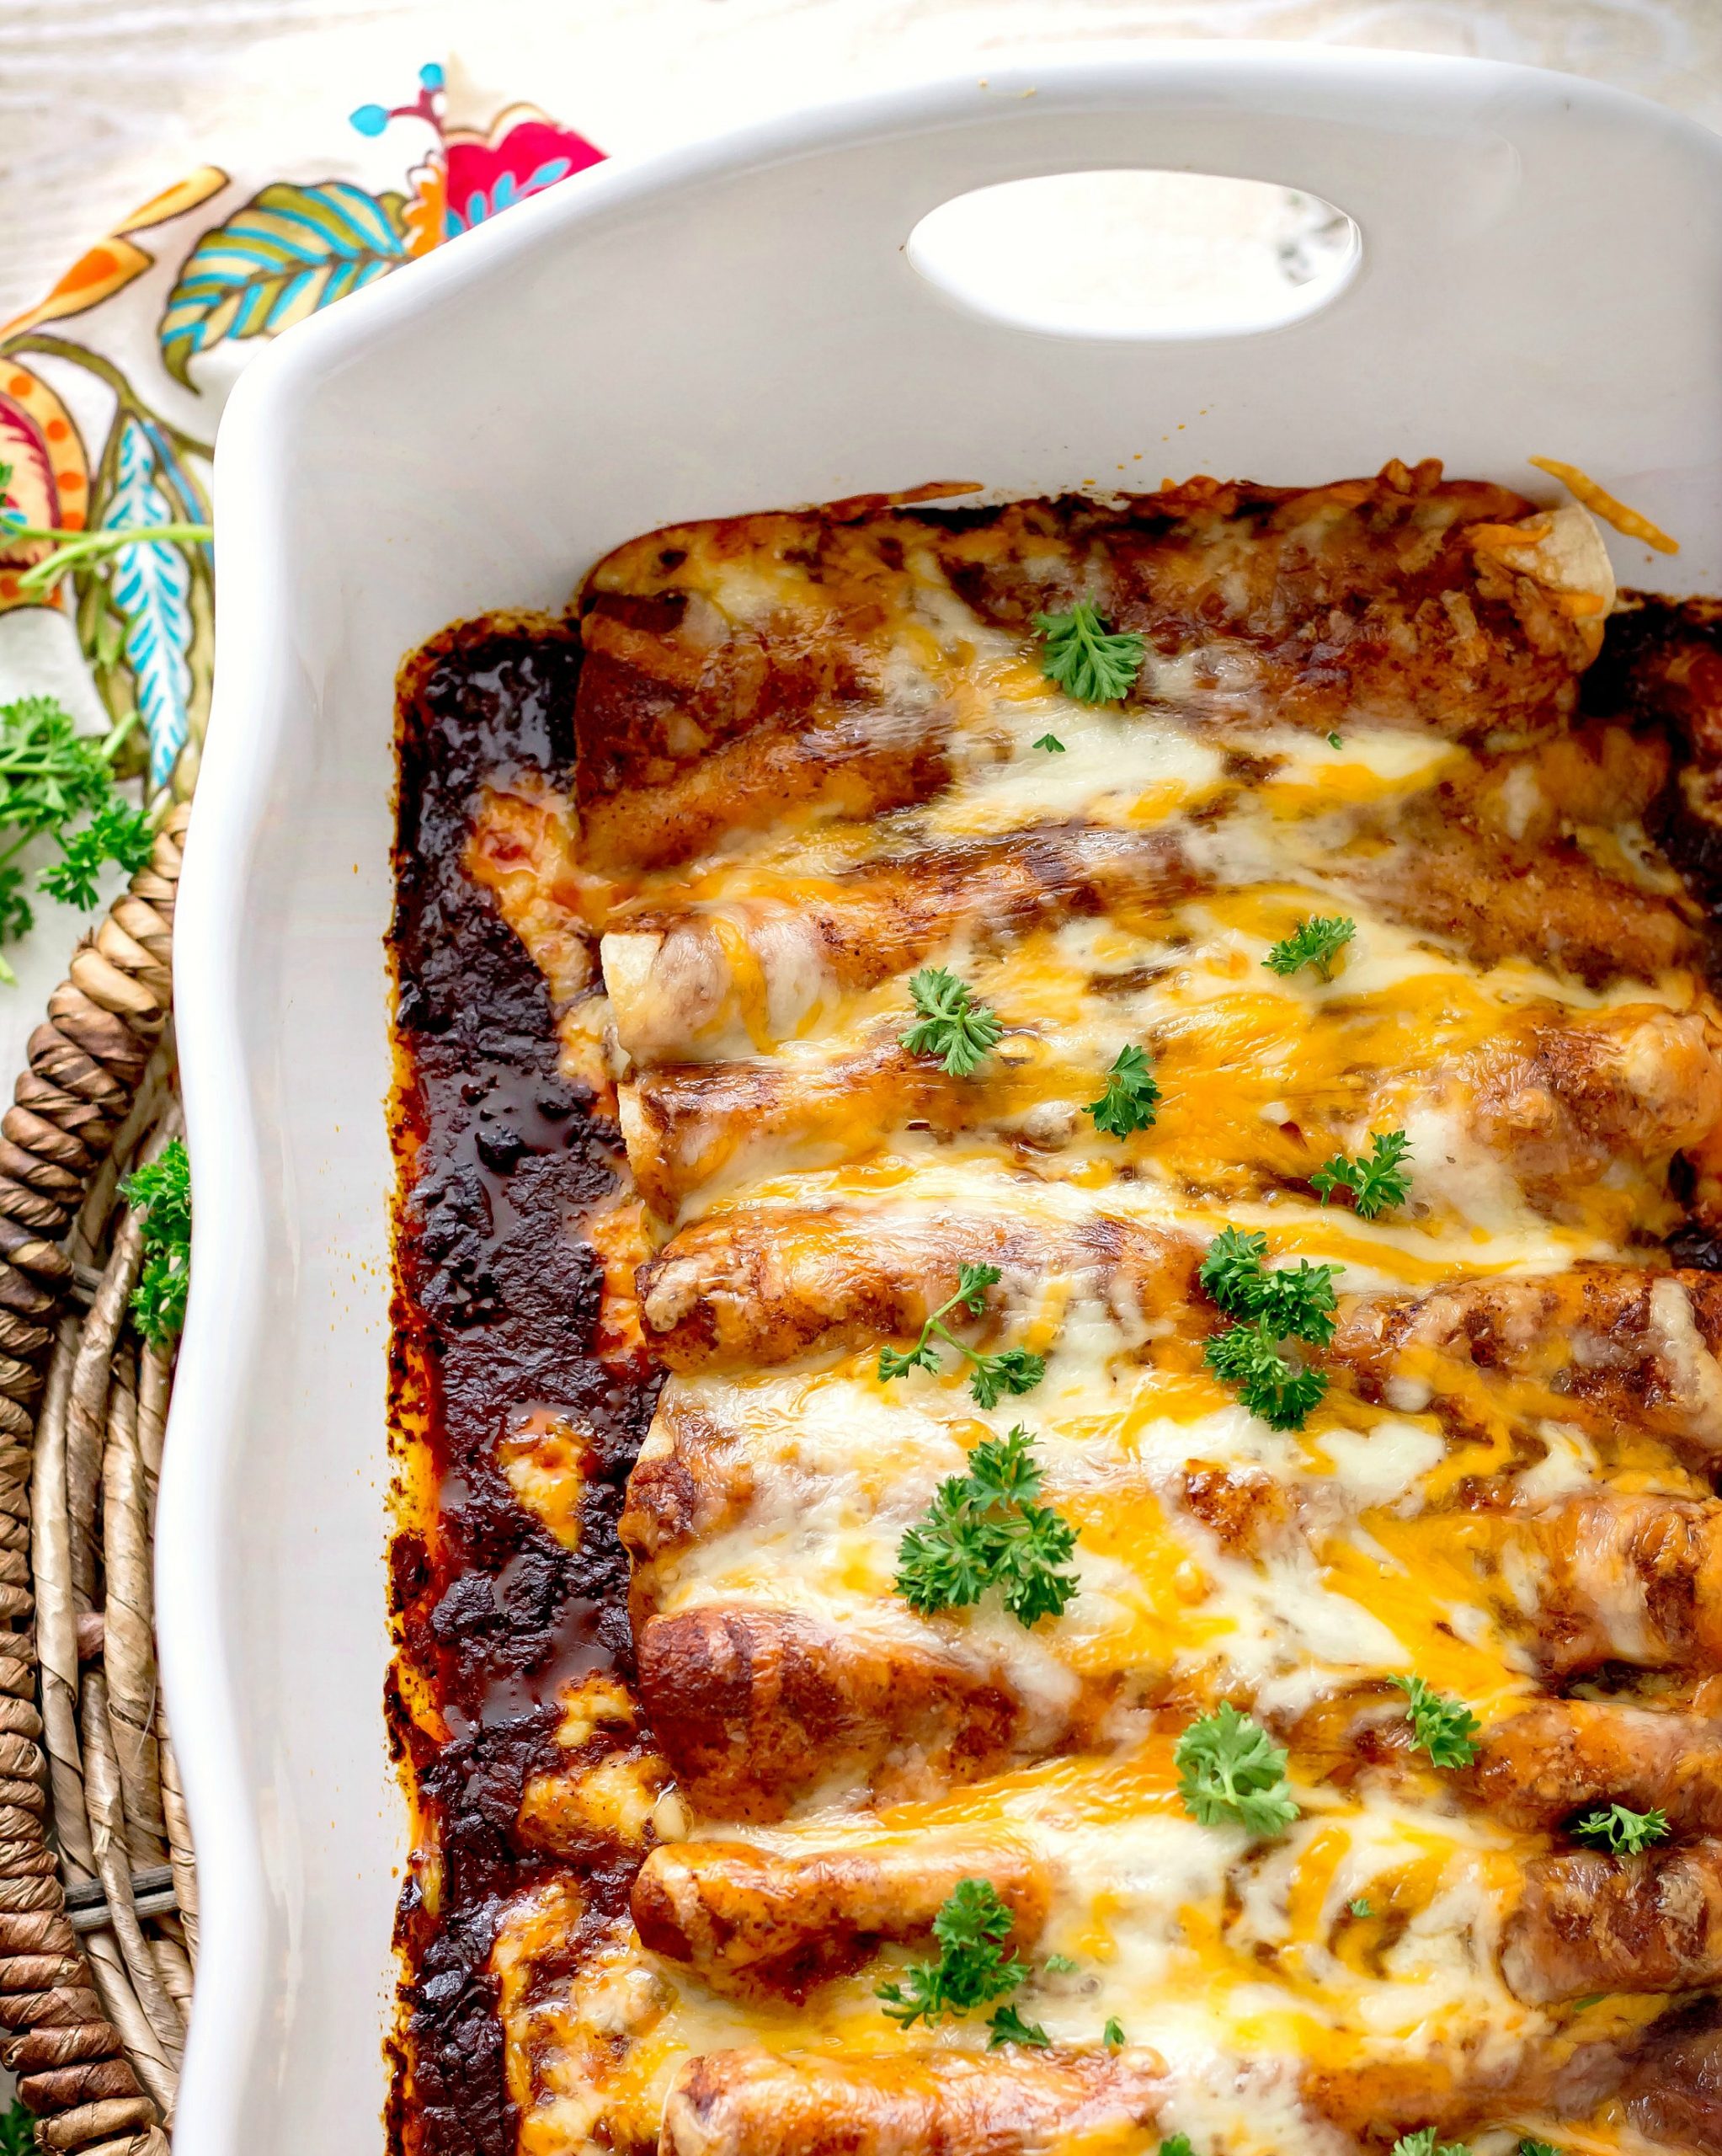 Baked Chicken Enchiladas with Homemade Red Sauce and melted cheese on top in a white baking dish